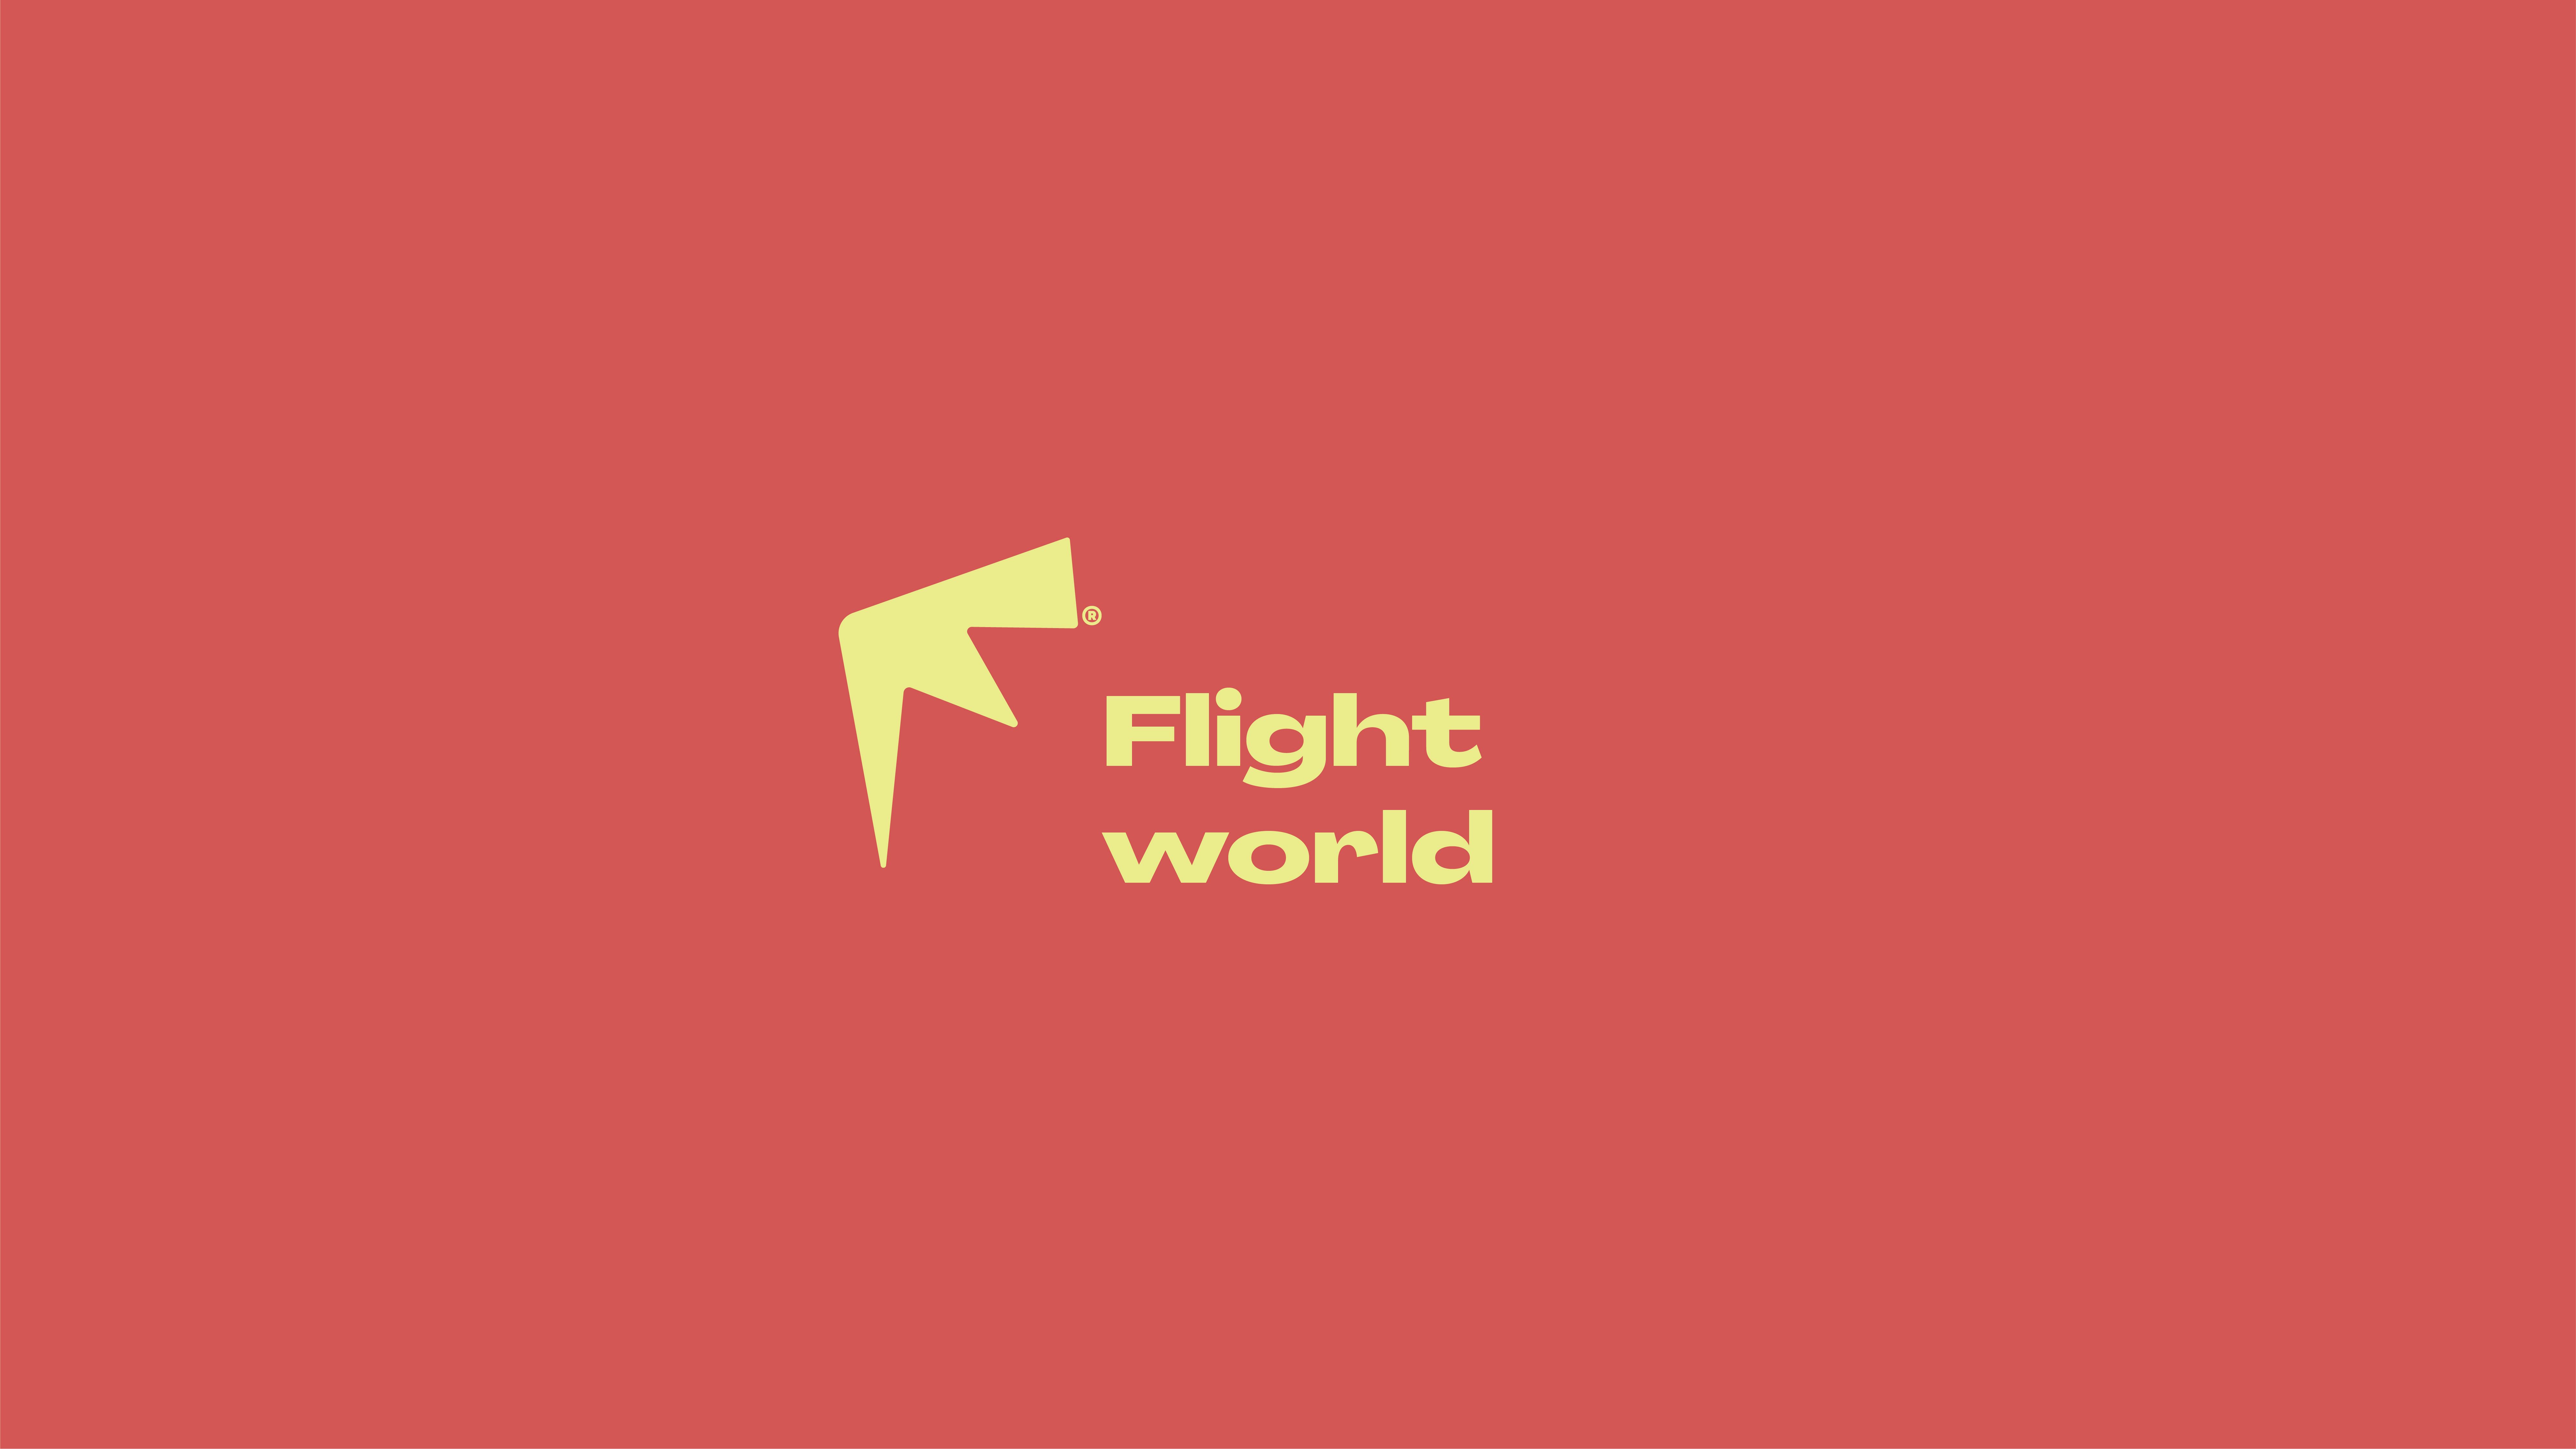 Sky Co. Elevates Travel Excitement with Innovative Branding for Flight World